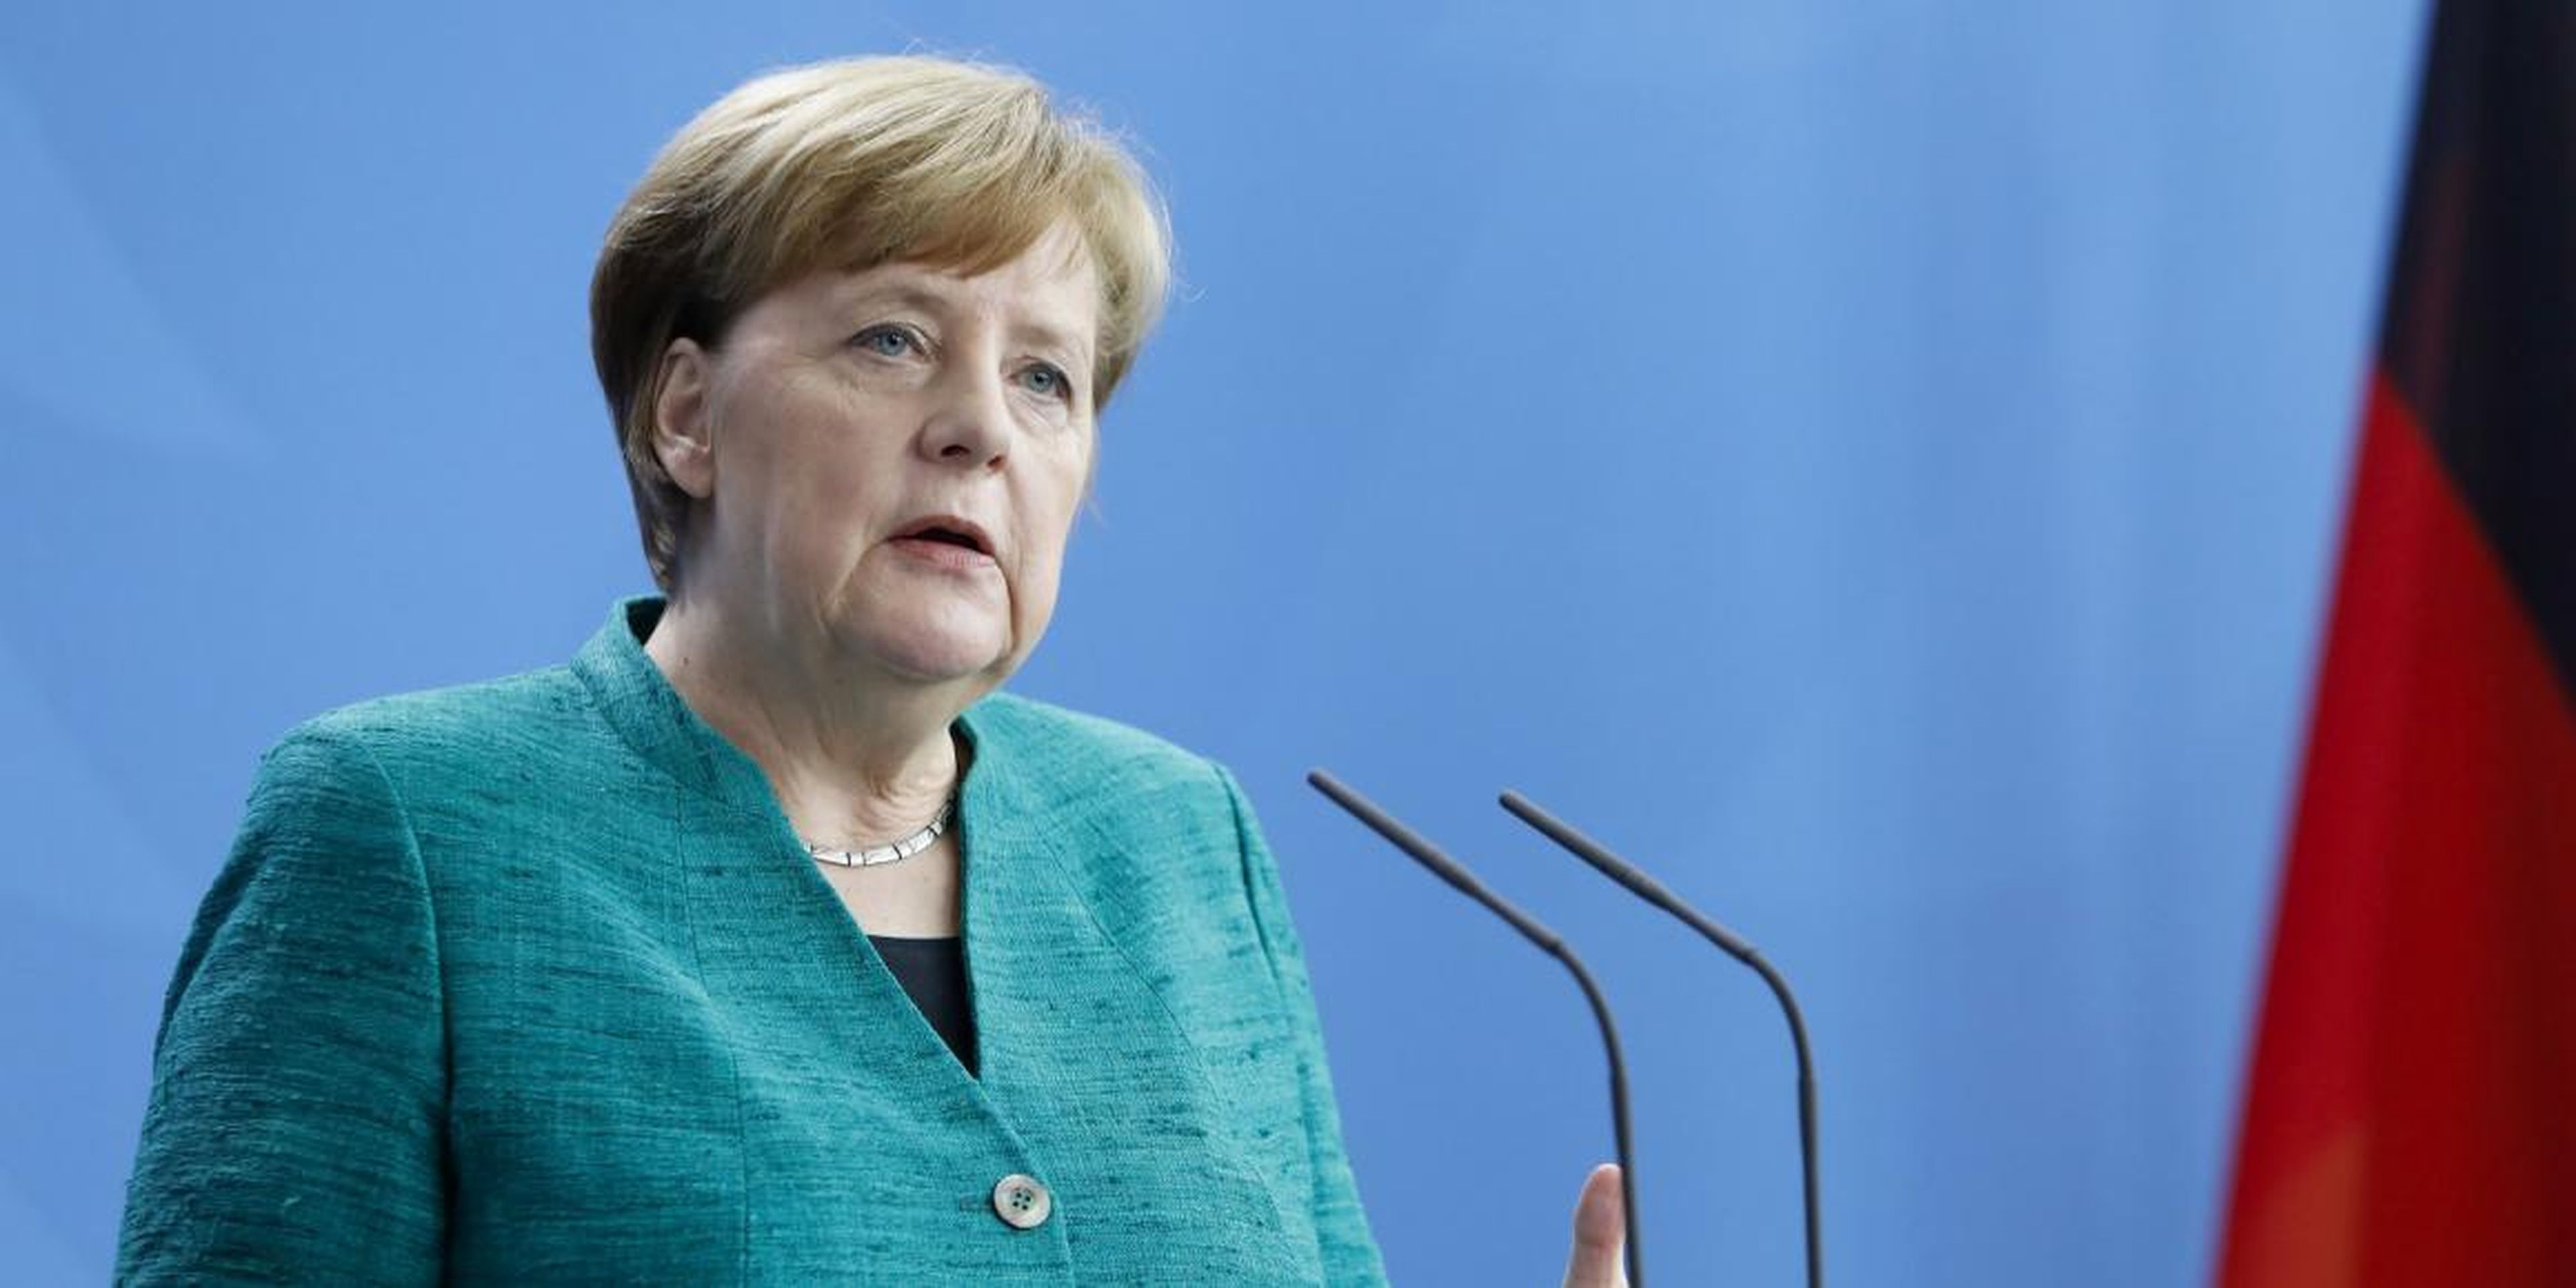 Two of German Chancellor Angela Merkel's email addresses were published in the hack.